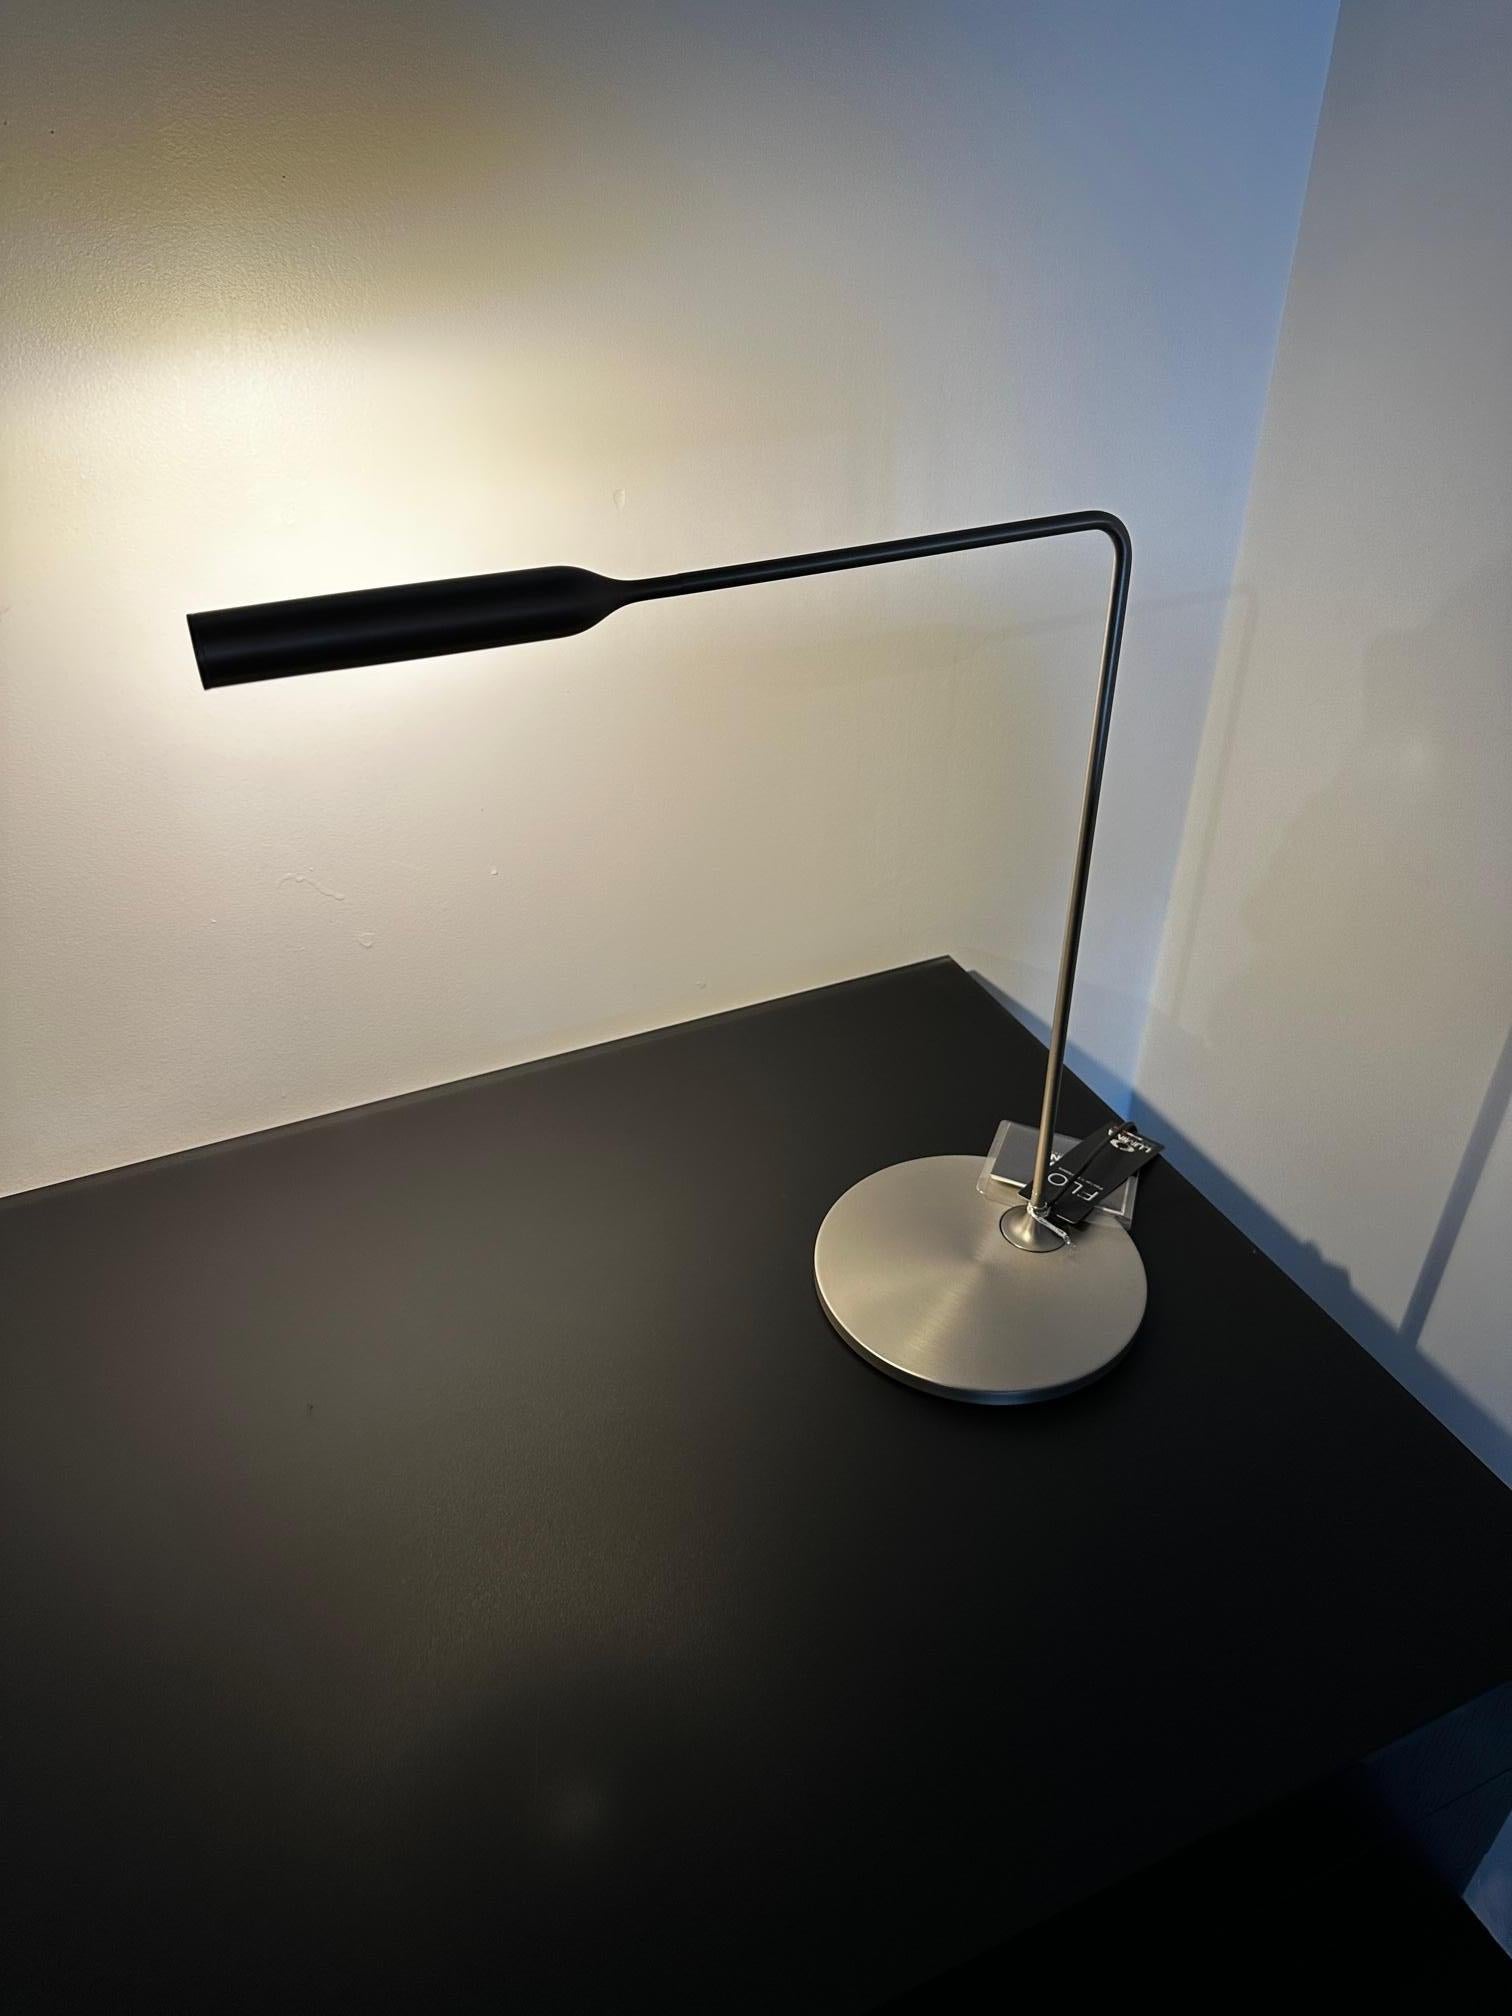 Flo desk
6W LED
2-step push button dimming
on the head
Foster and Partners
Task LED light in varnish coated aluminum and steel. Its head rotates by 300° for direct lighting, the arm pivots on base by 120°. 6W LED which you can switch on with one